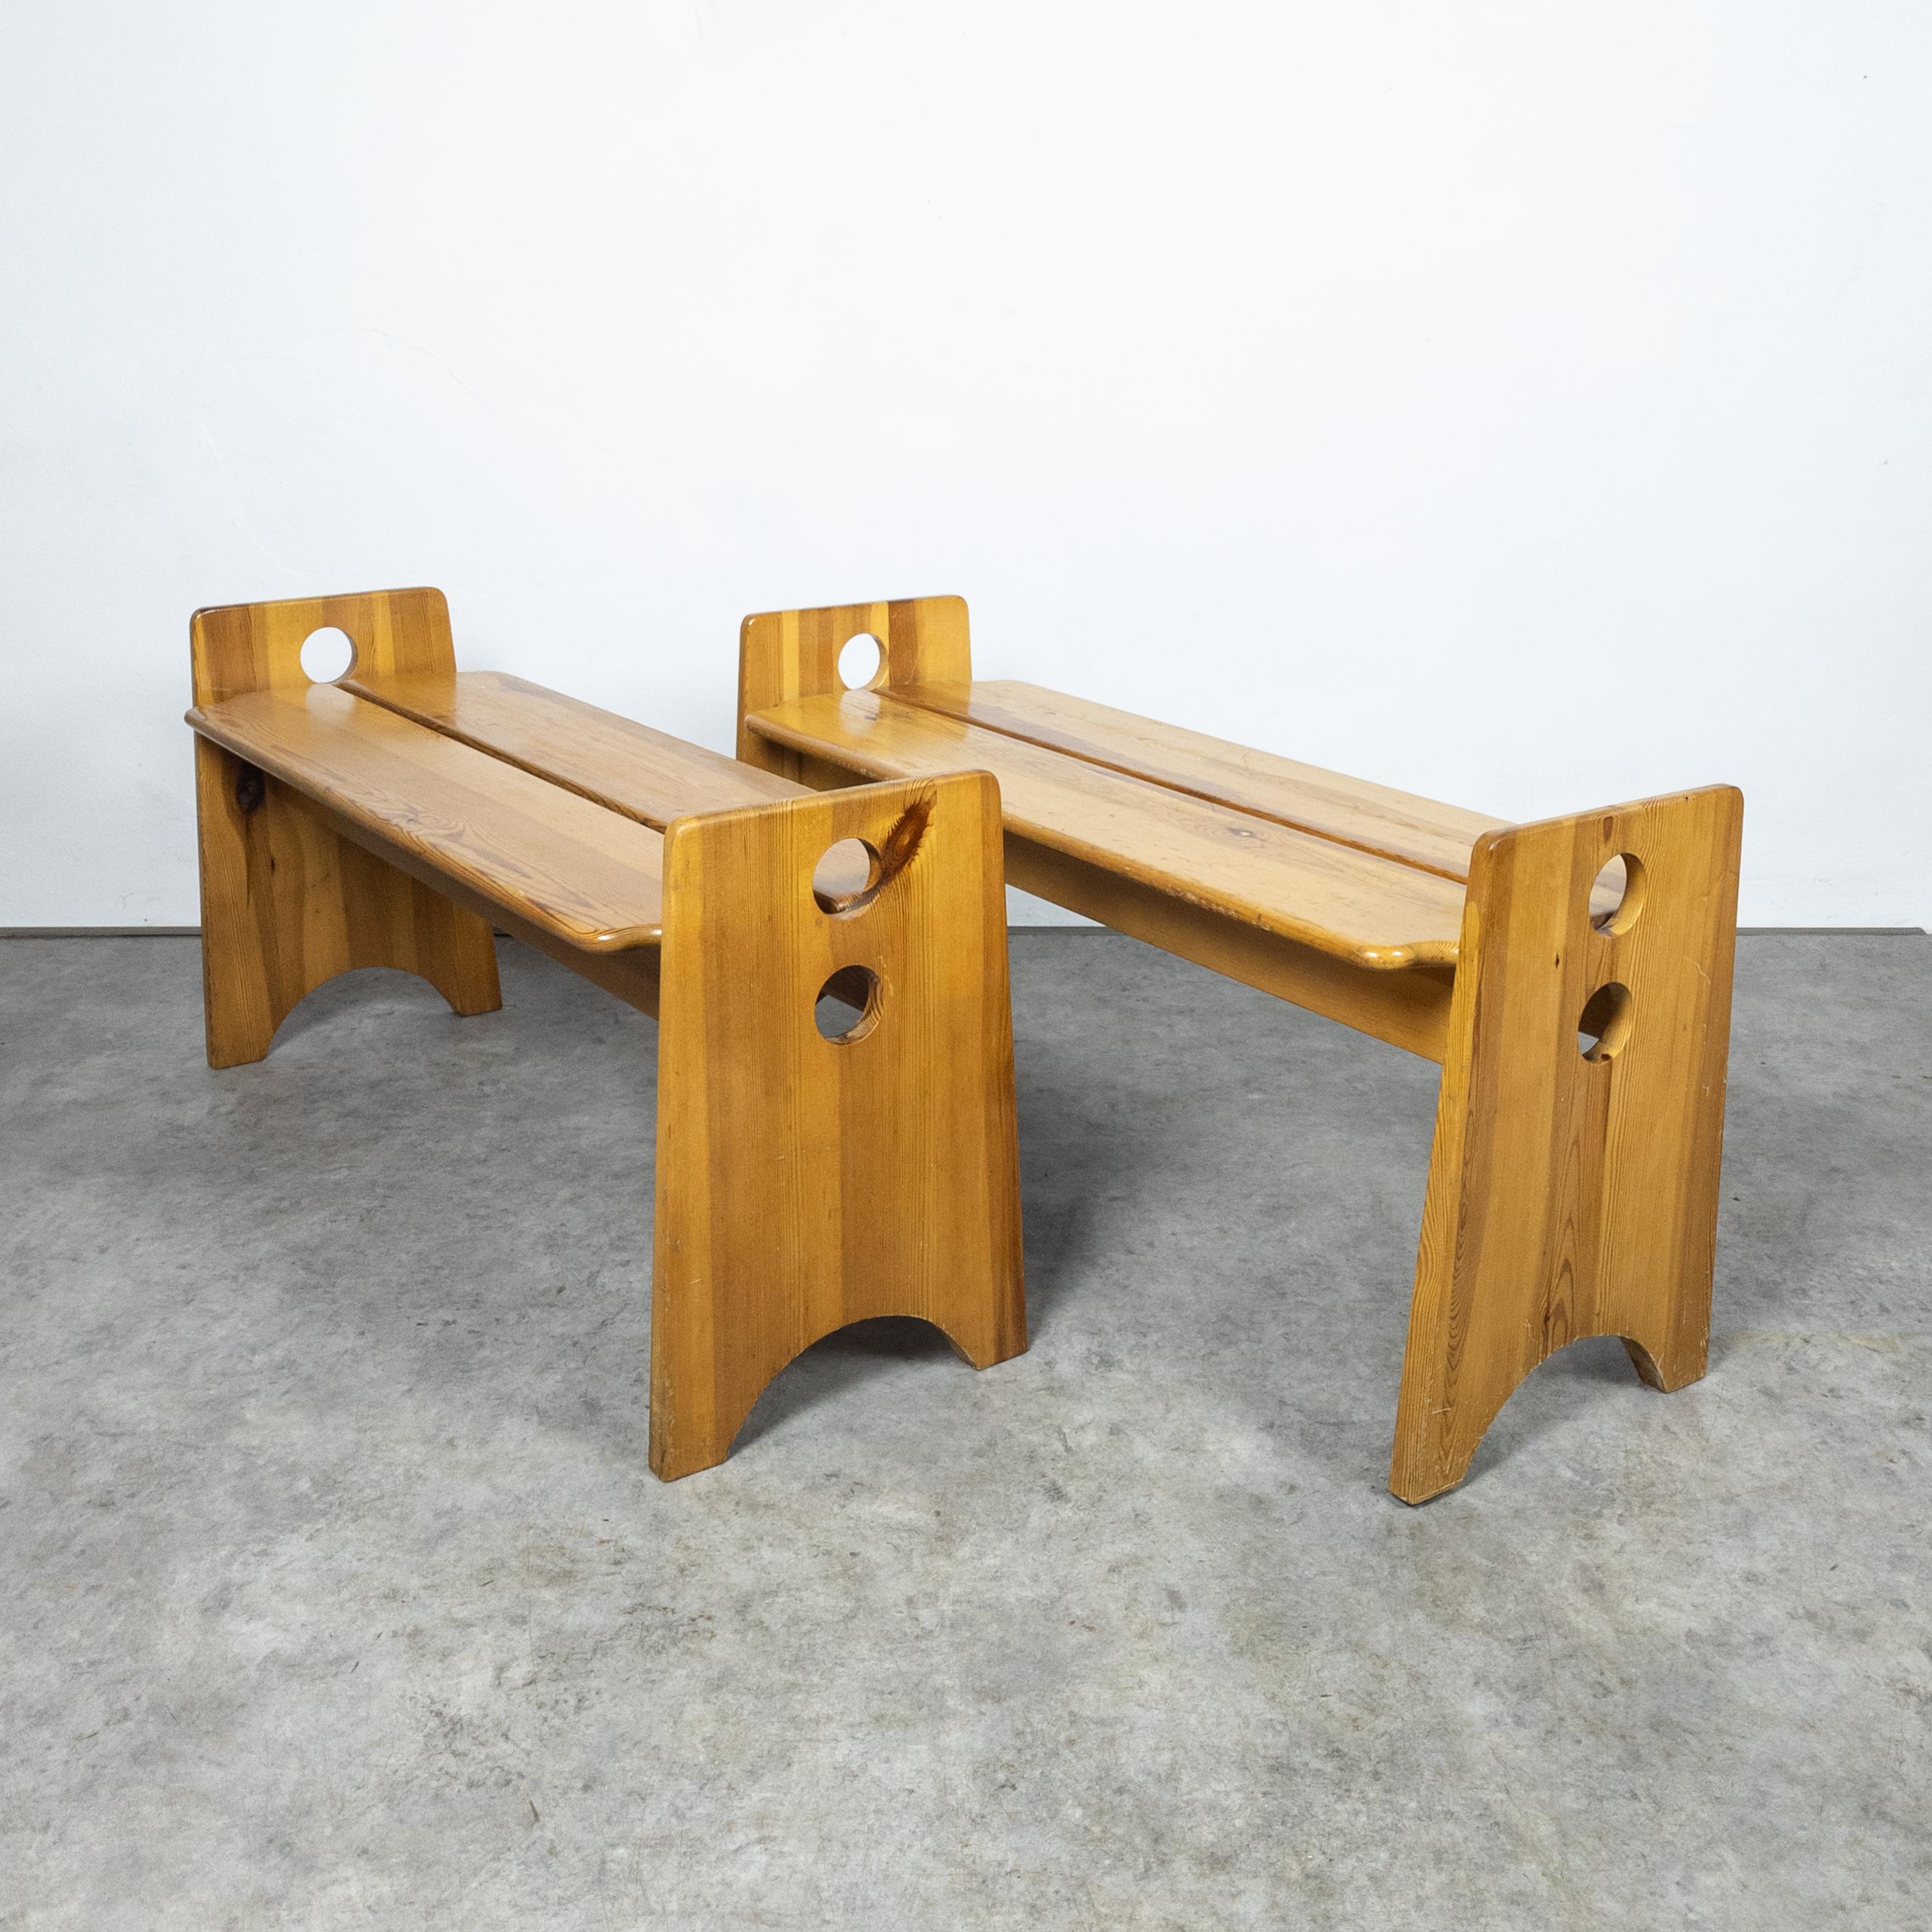 Pair of durable, solid pine wood benches in original condition. Exceptionally sturdy, showcasing impressive Scandinavian craftsmanship. Displaying typical signs of wear and age, yet structurally sound. Length 112 cm, depth 37 cm, seat height 44